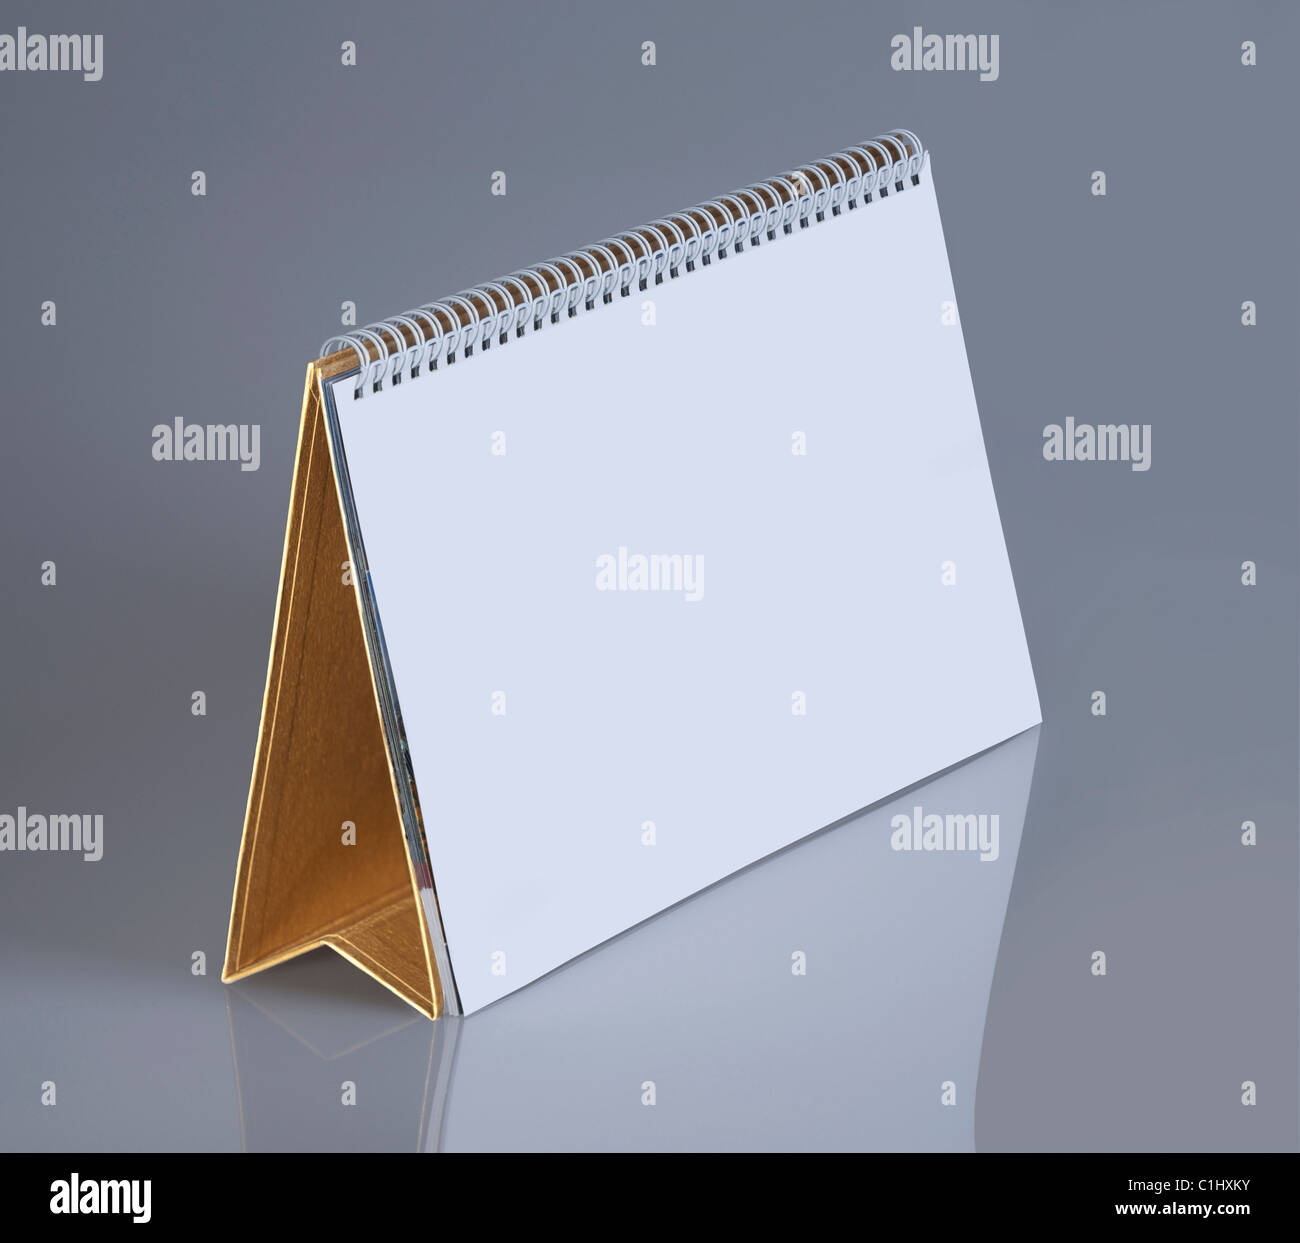 Plain desk calendar with a gold stand for design layout Stock Photo